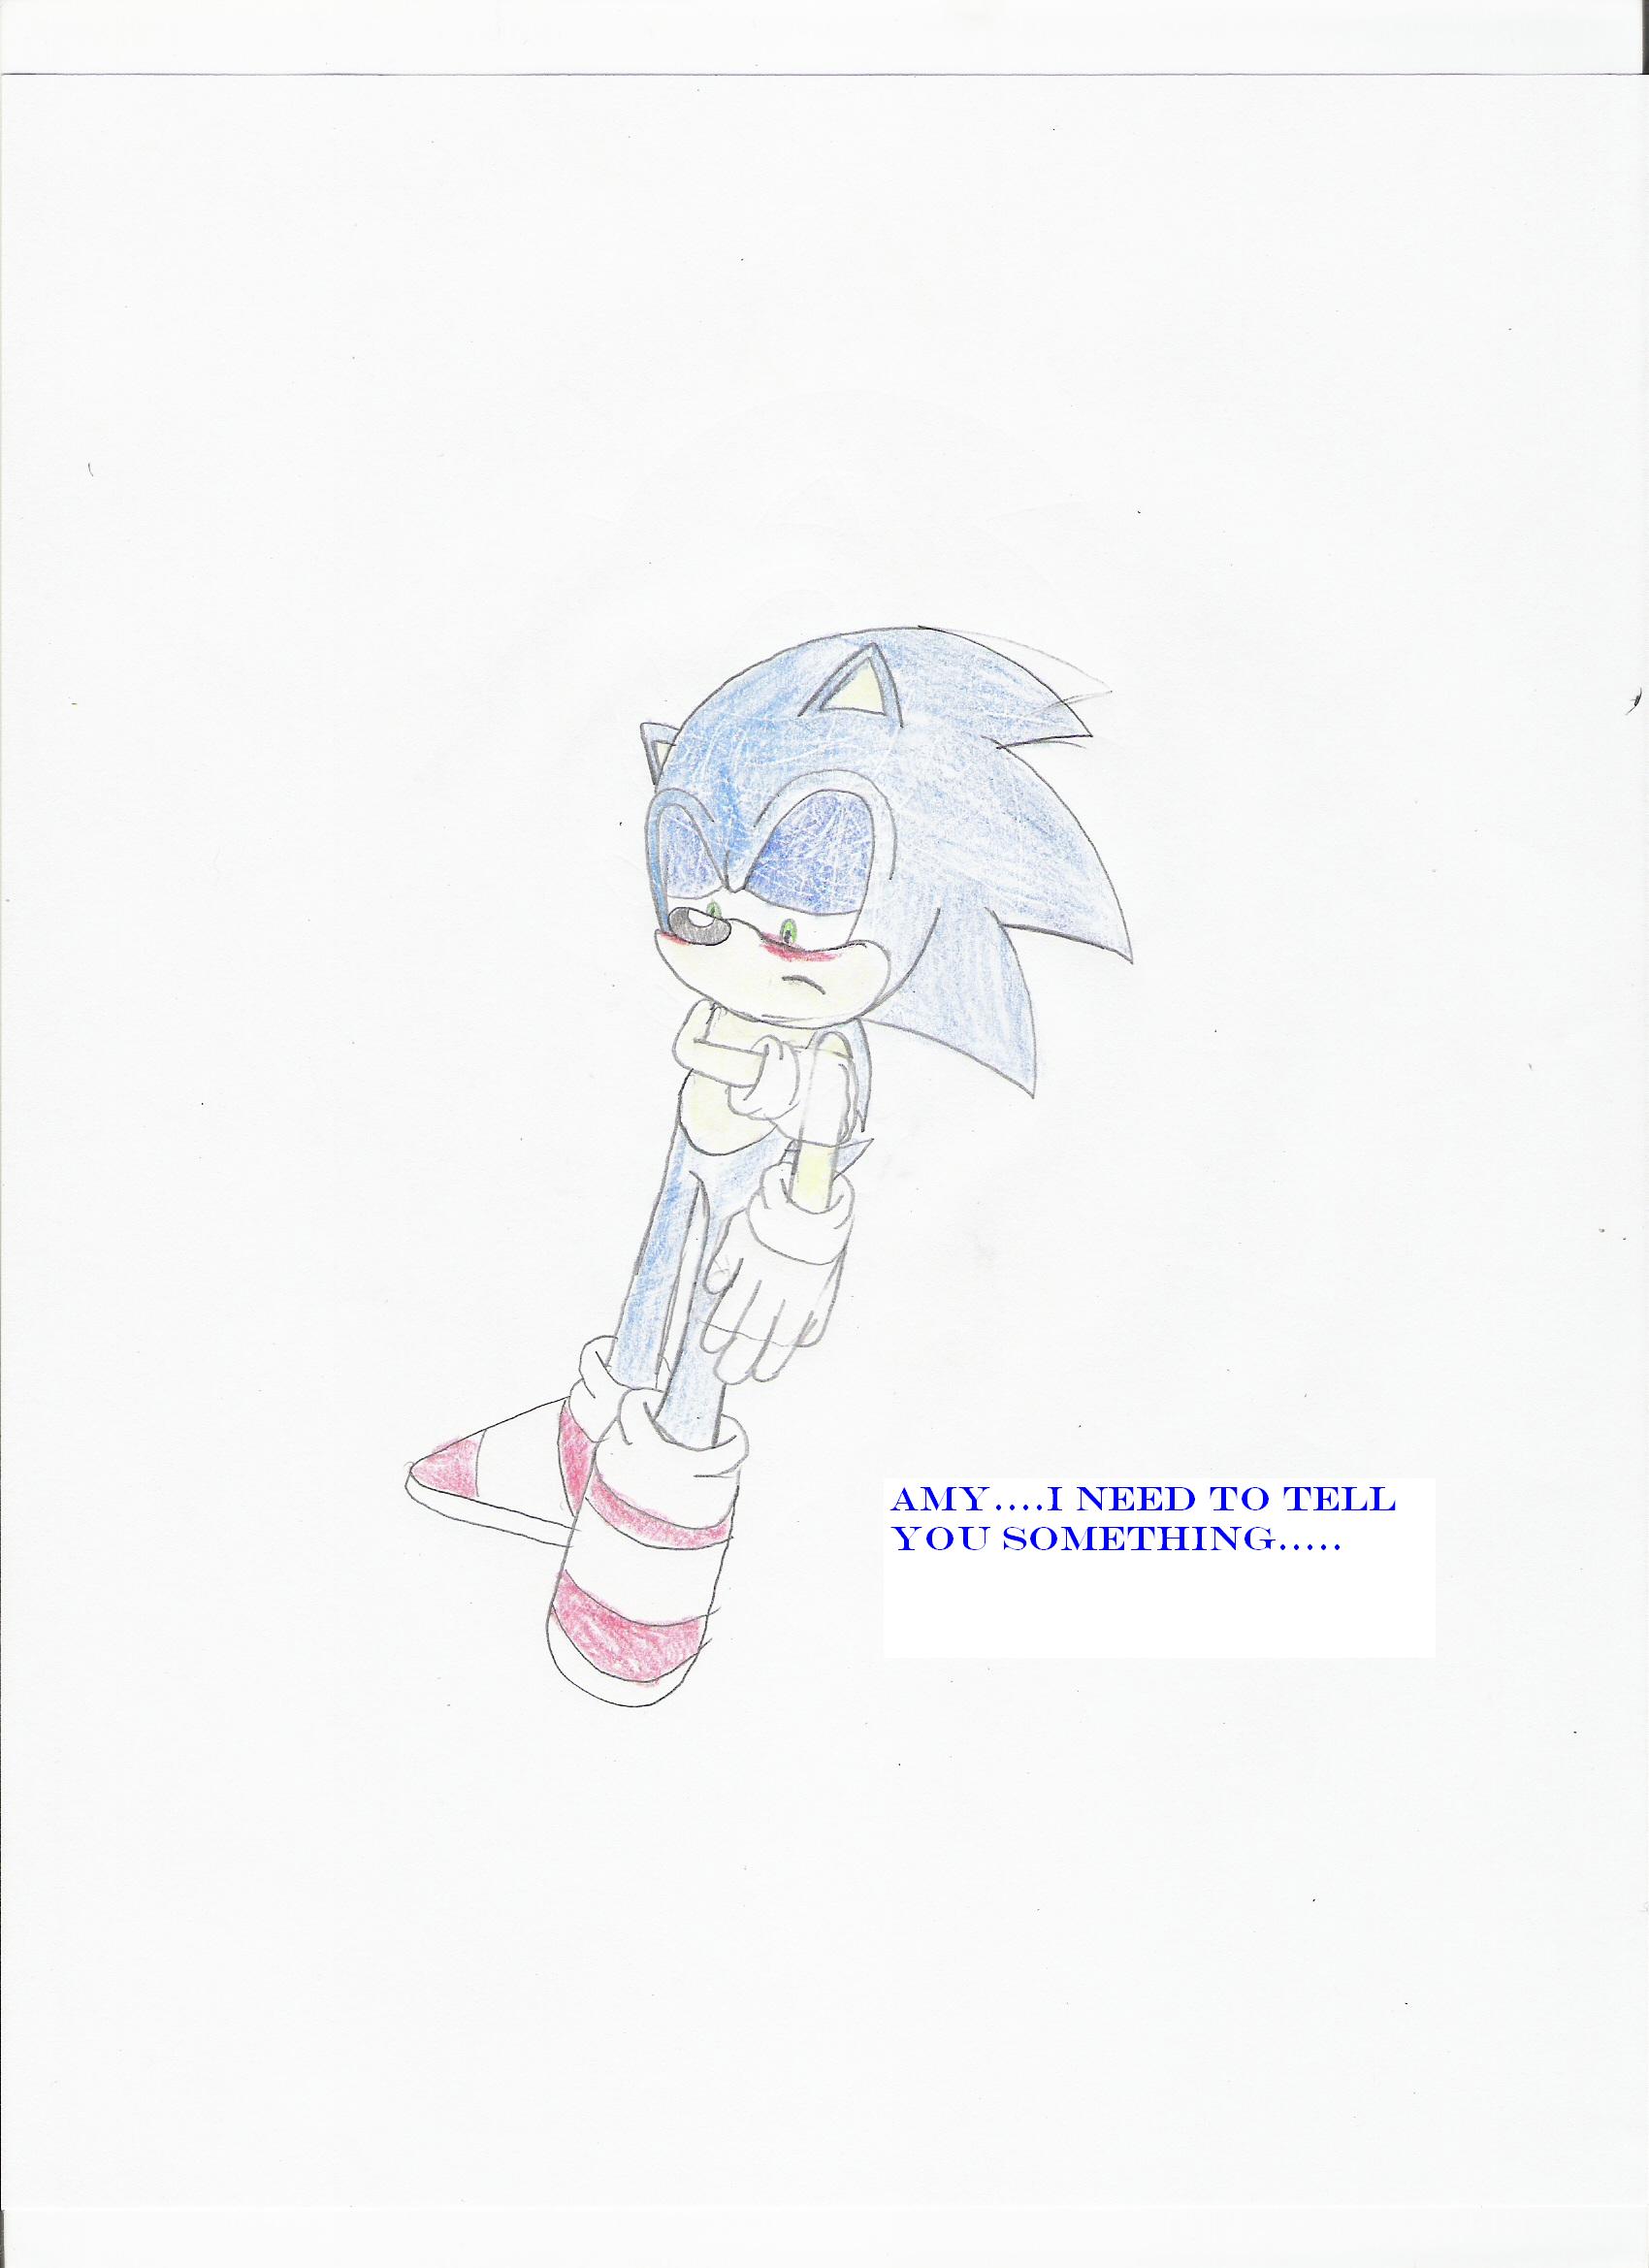 Sonic Needs to Confess by Marluxia1445679011